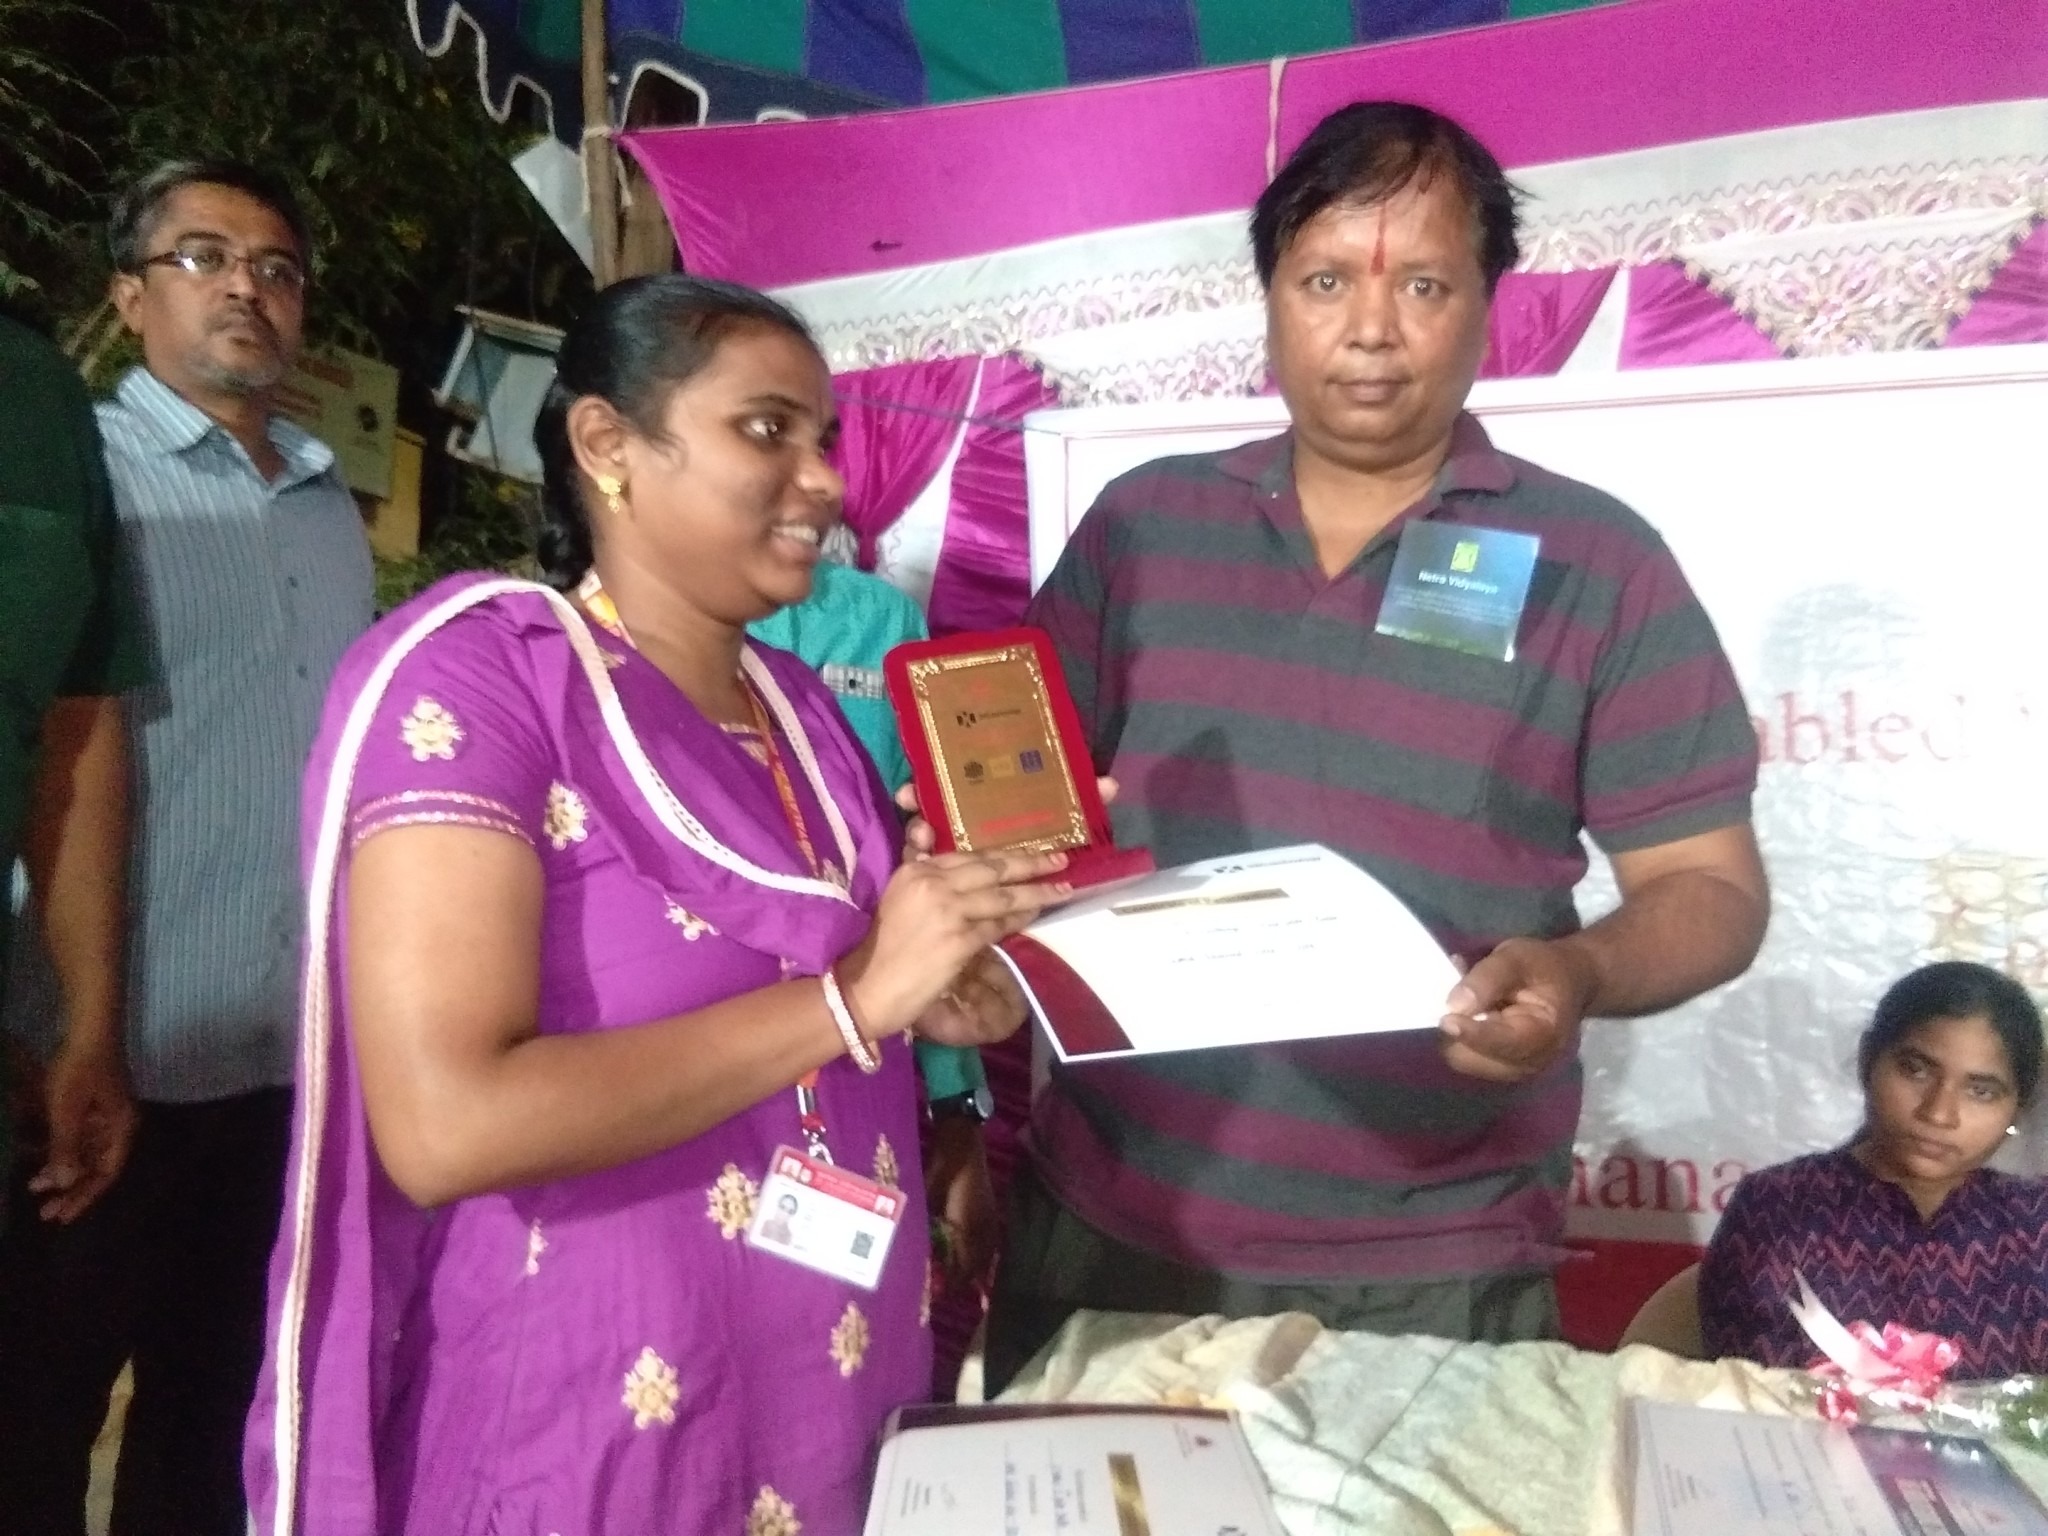 Braille reading competitions